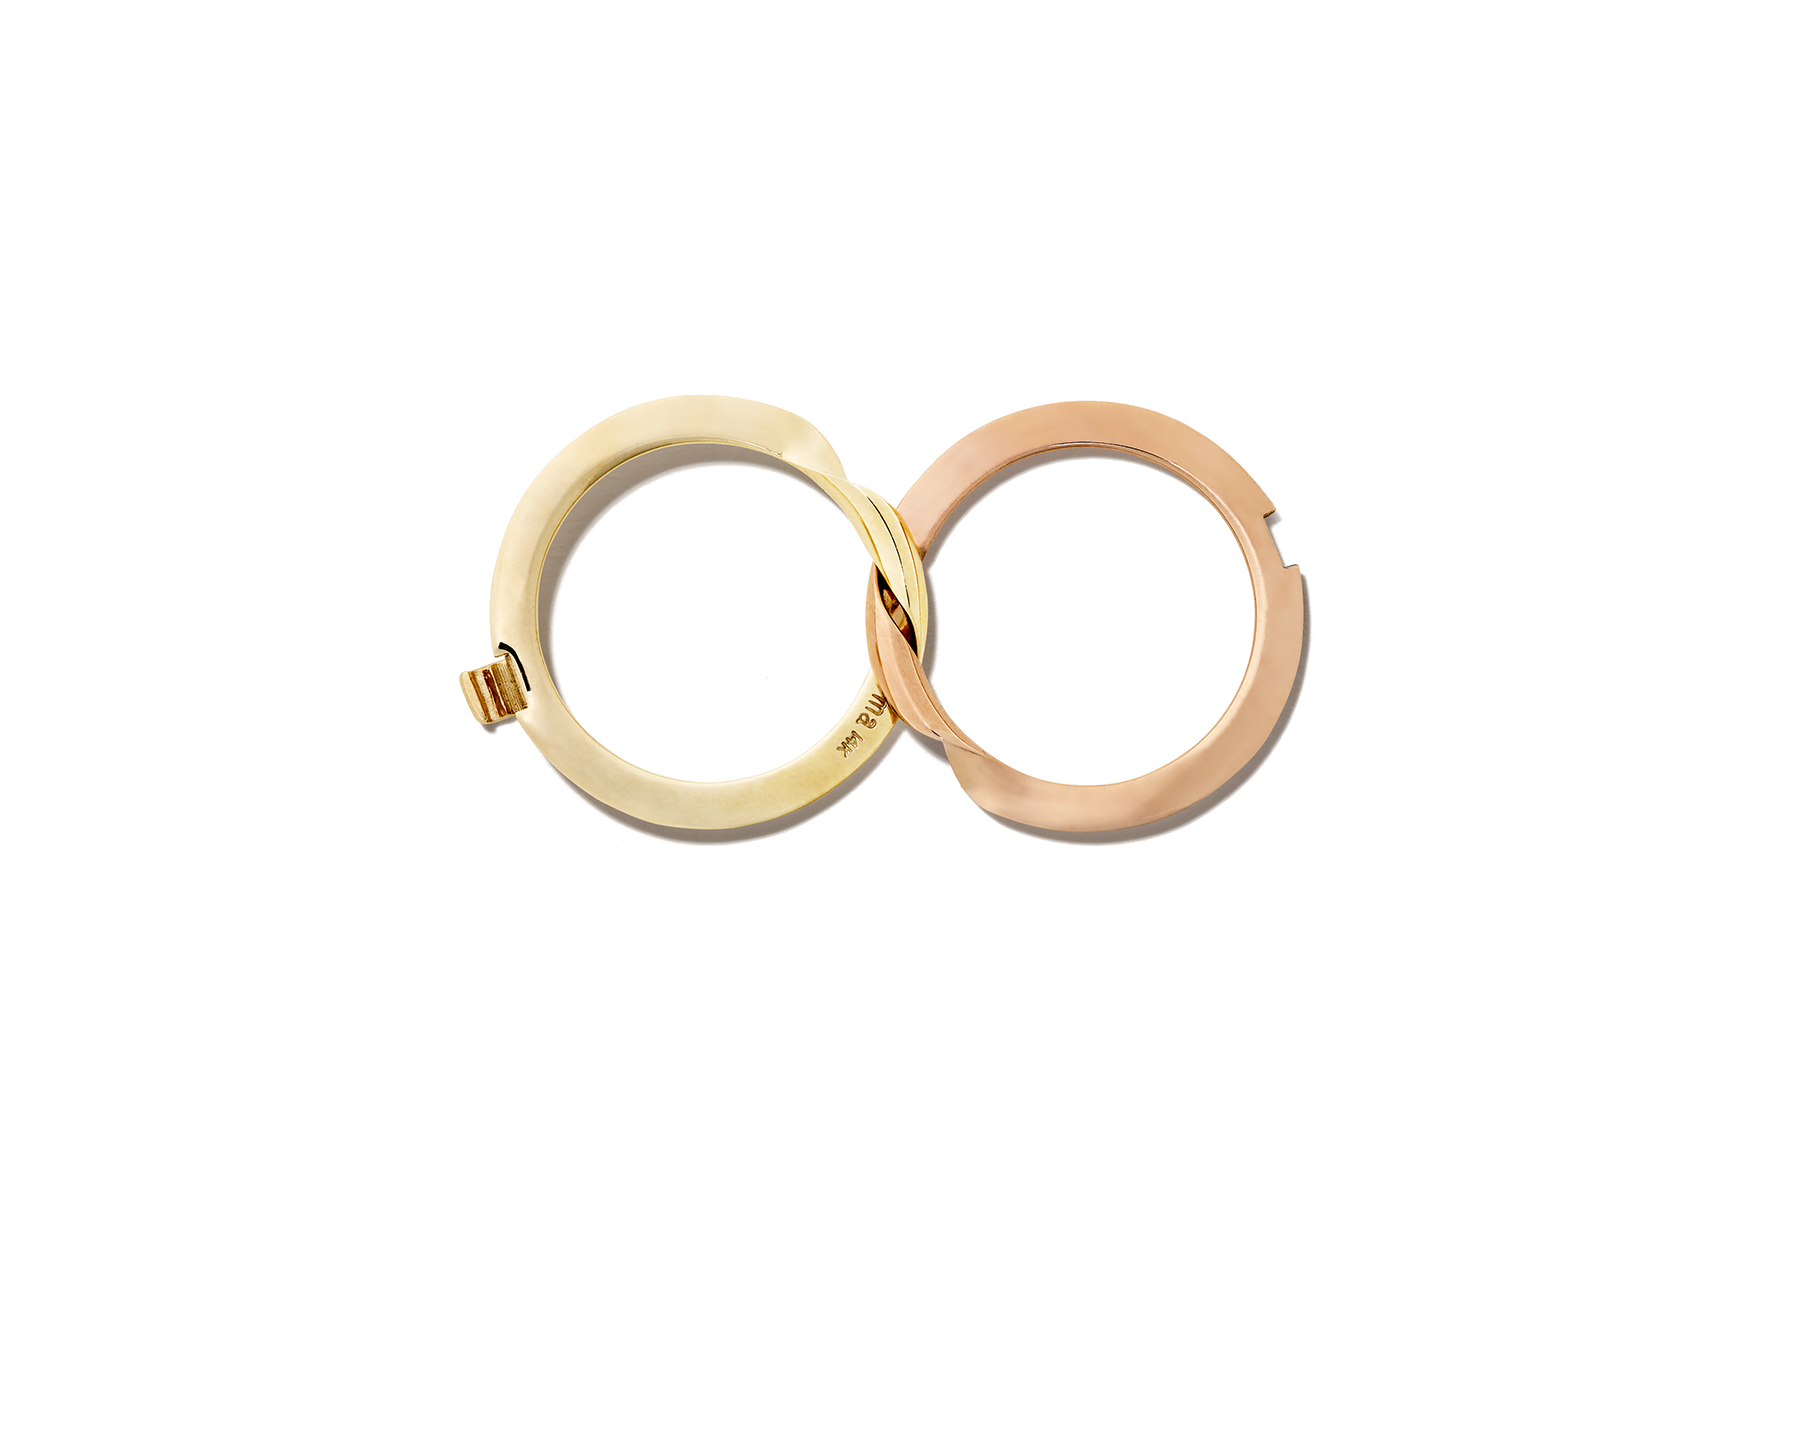 Aerial view of rose gold and yellow gold intertwined rings